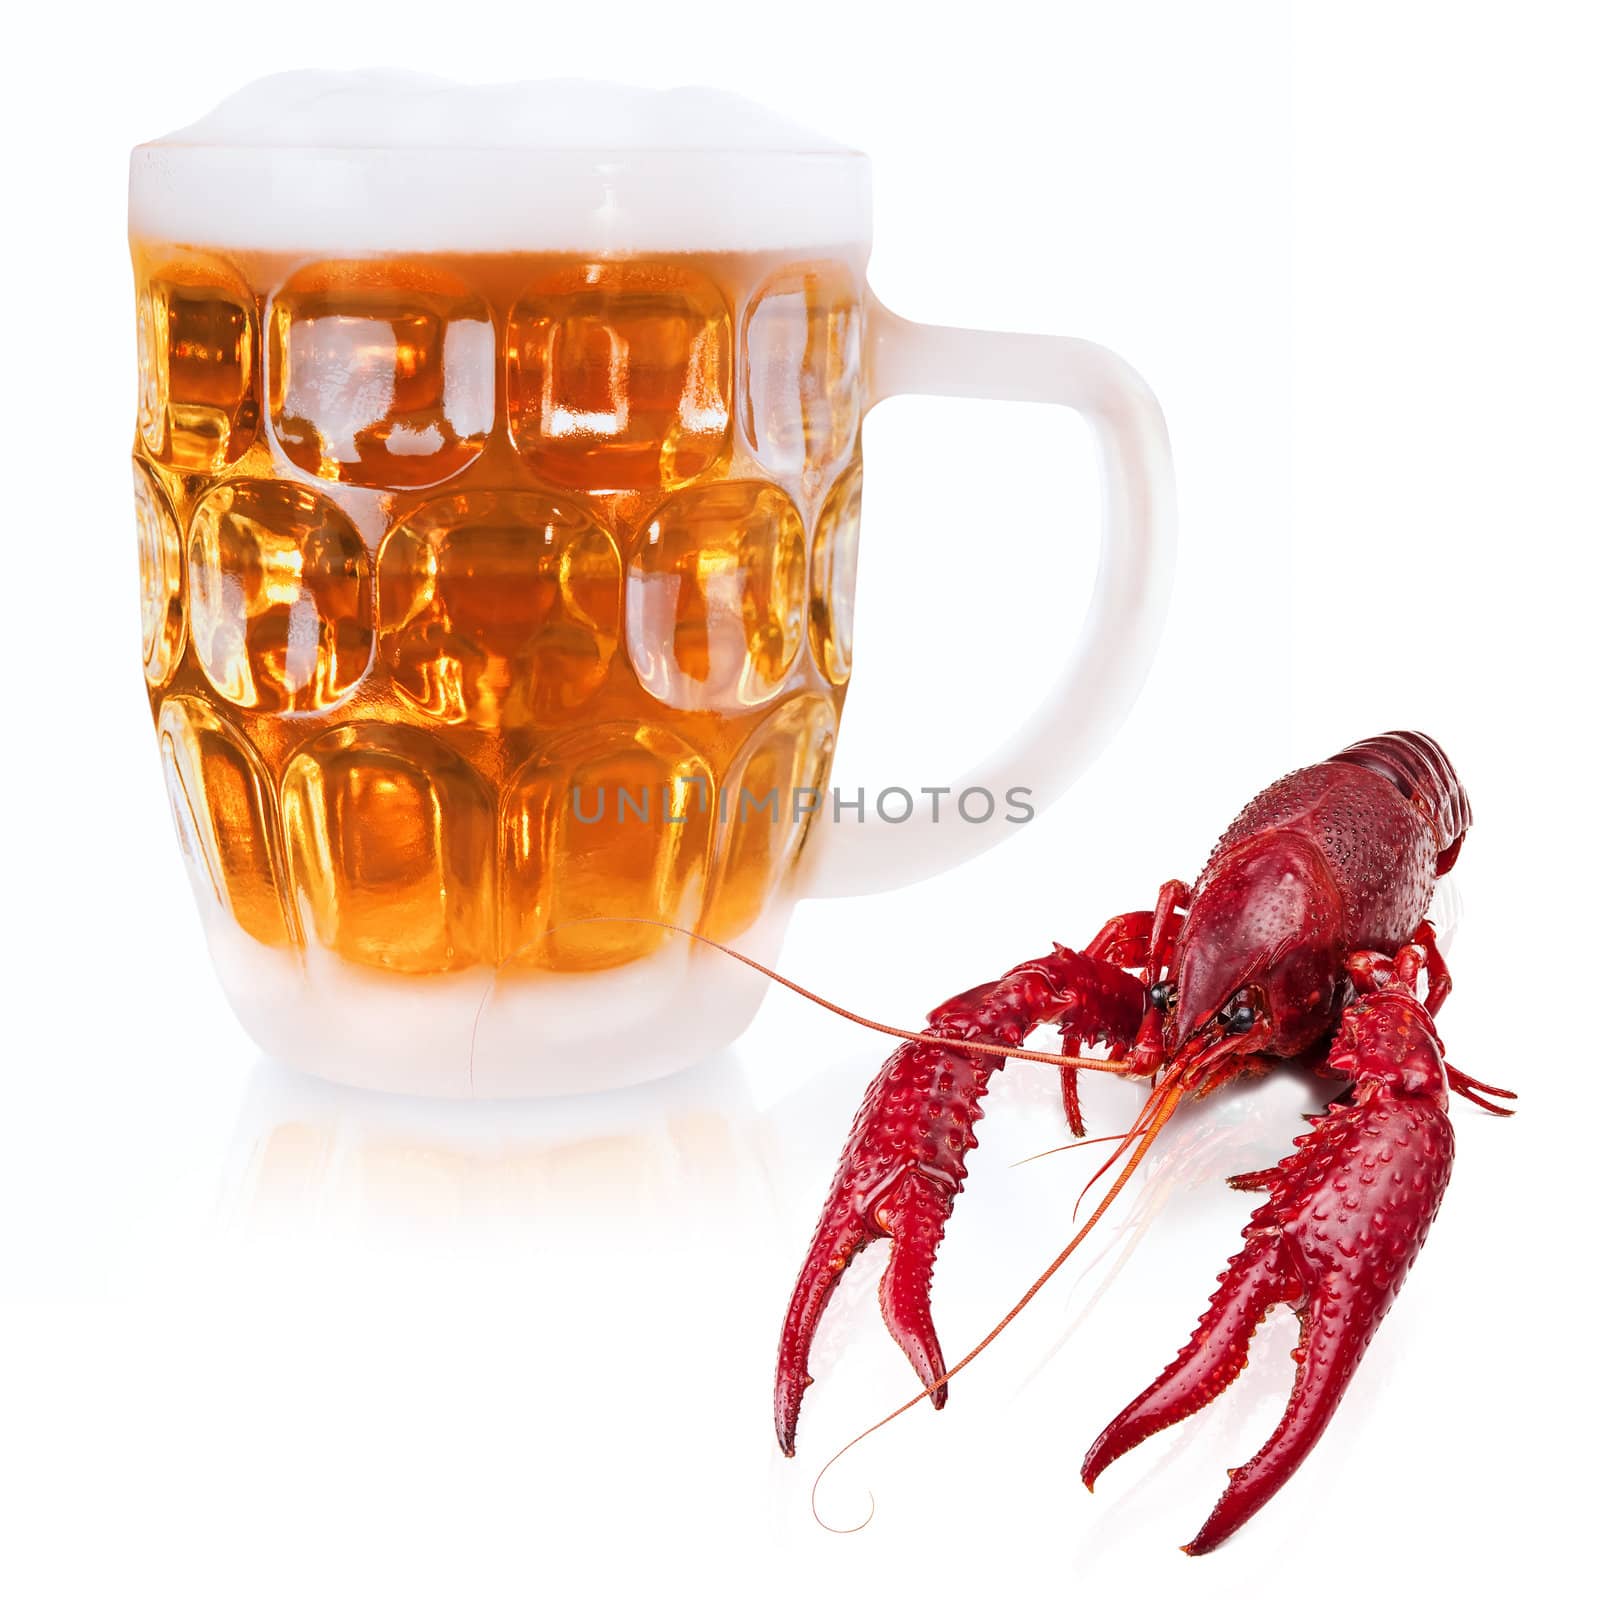 red boiled crawfish and mug of beer over the white